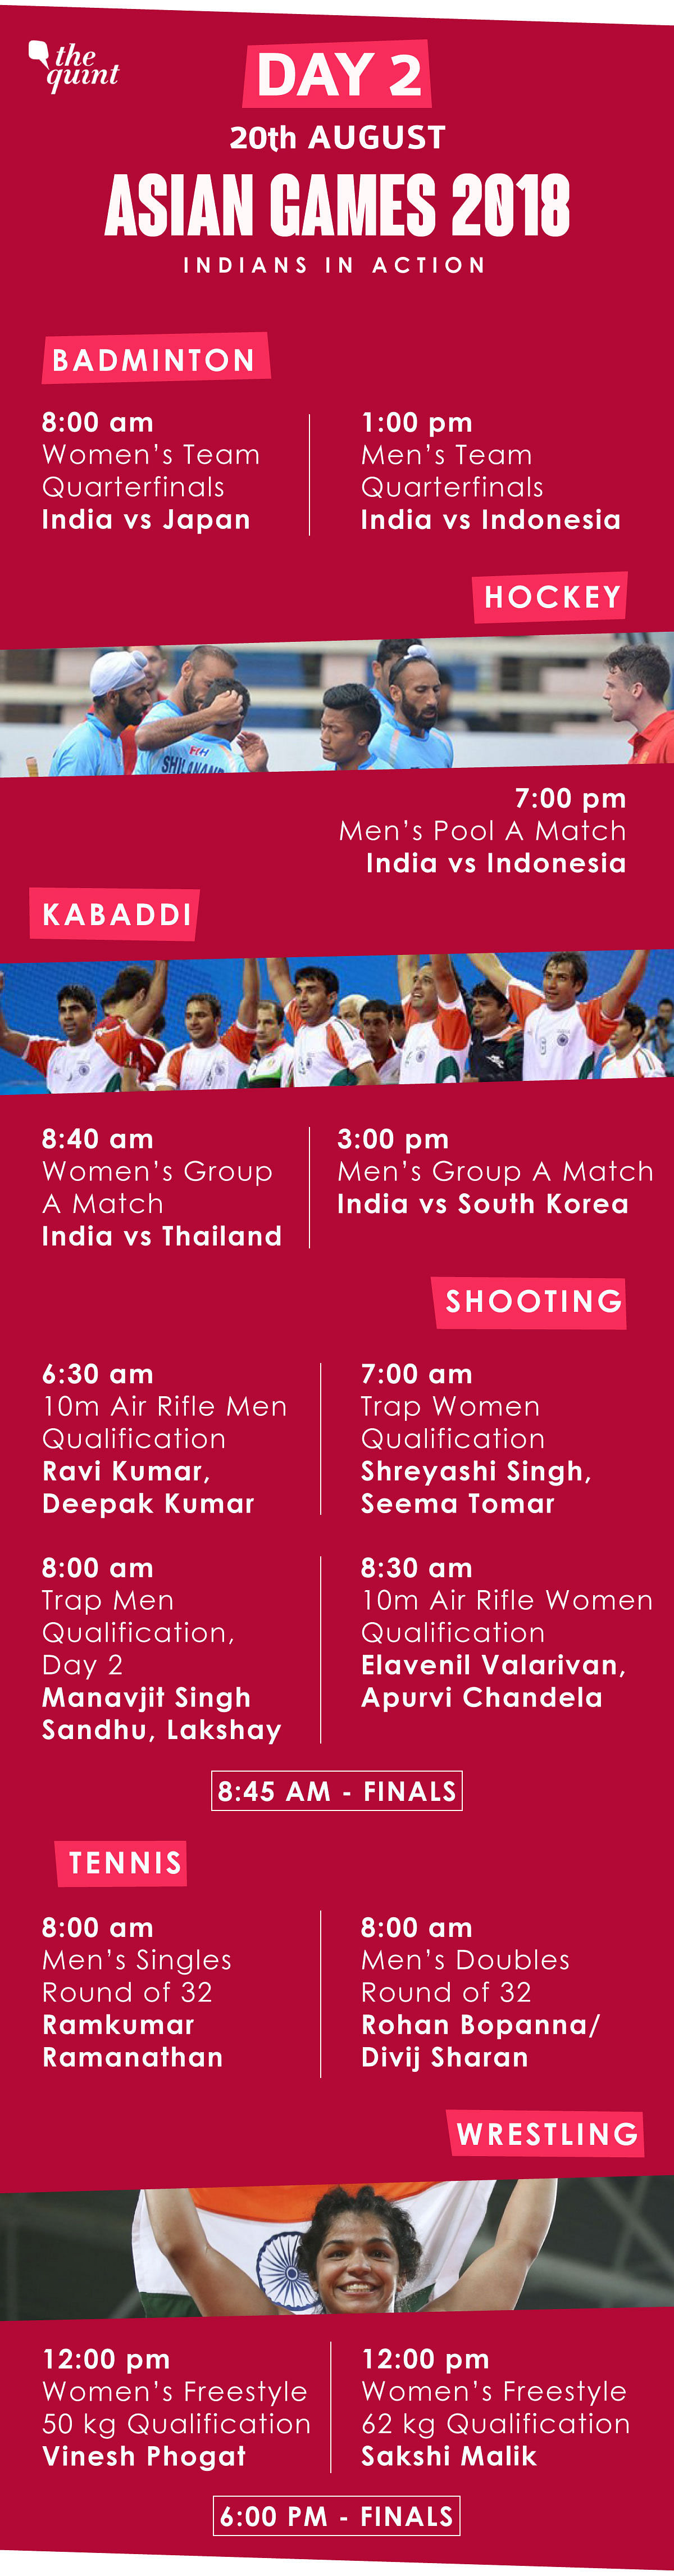 All the major events from Day 2 of the Asian Games 2018, in Indonesia on 20 August.